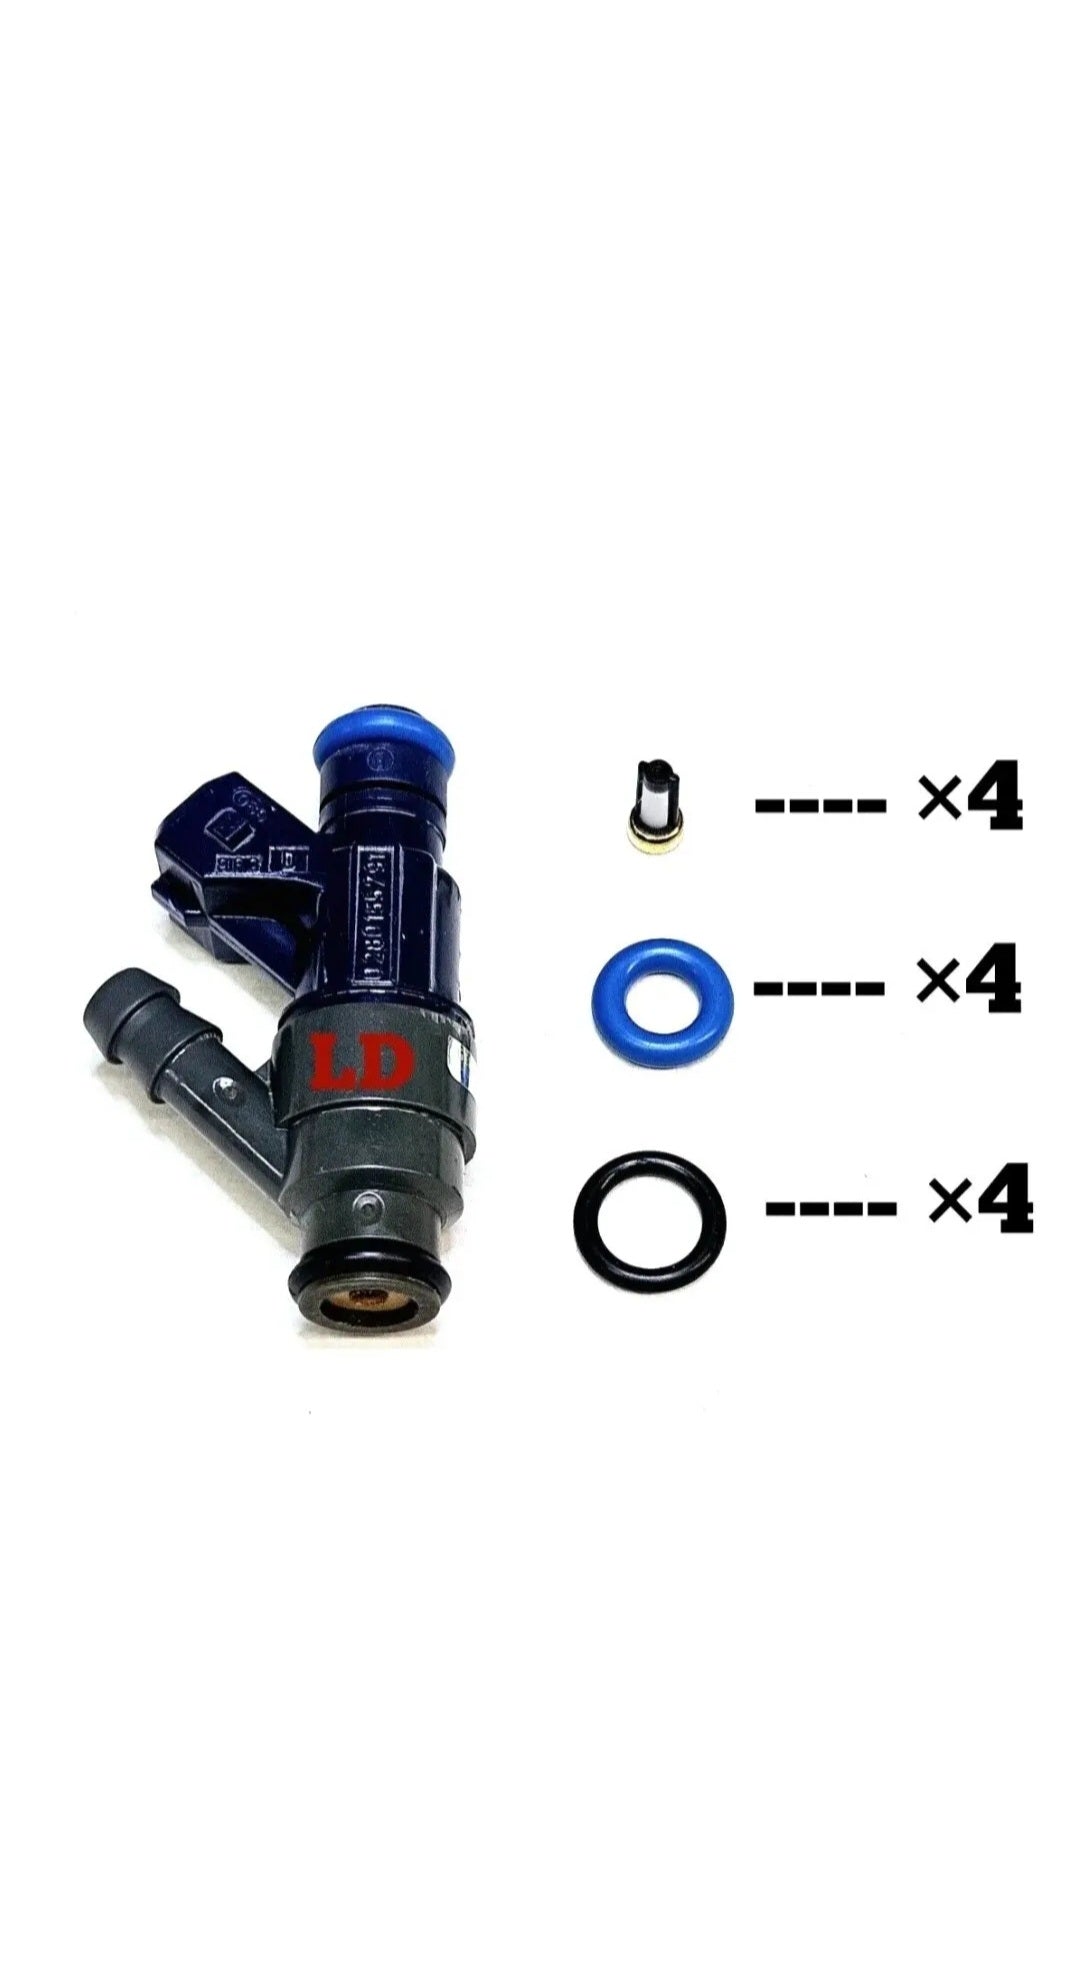 Injector repair kit for 0280155791 / 06A906031C